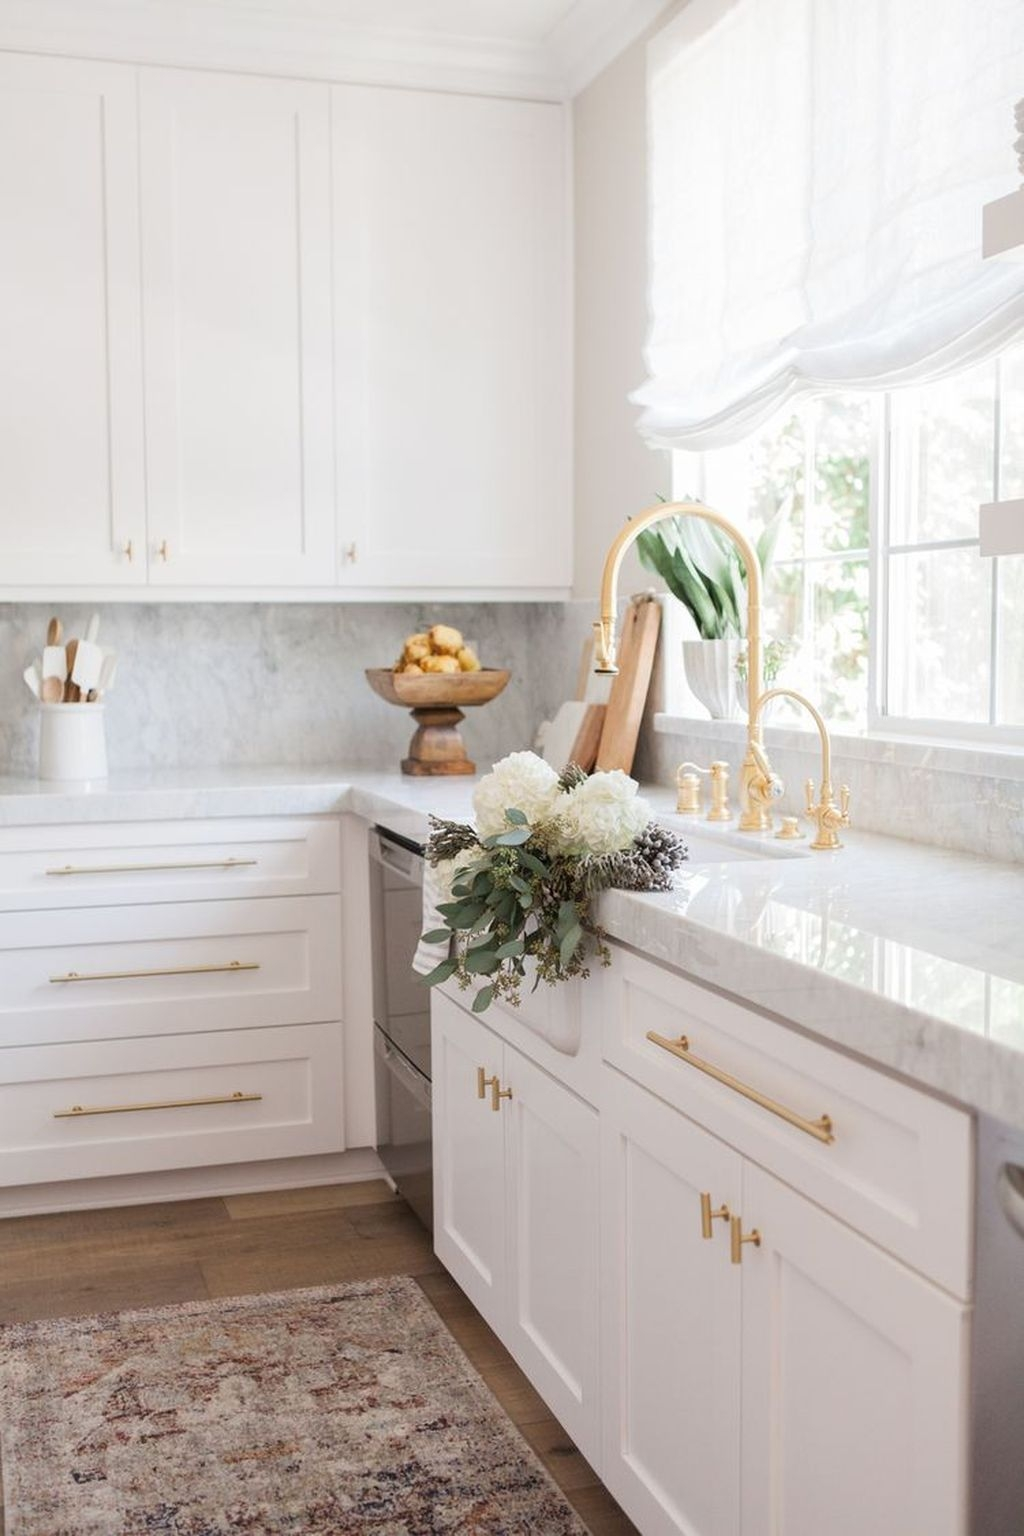 contemporary white and gold kitchen design with white shaker cabinets, brass bar pulls and brass kitchen sink faucet